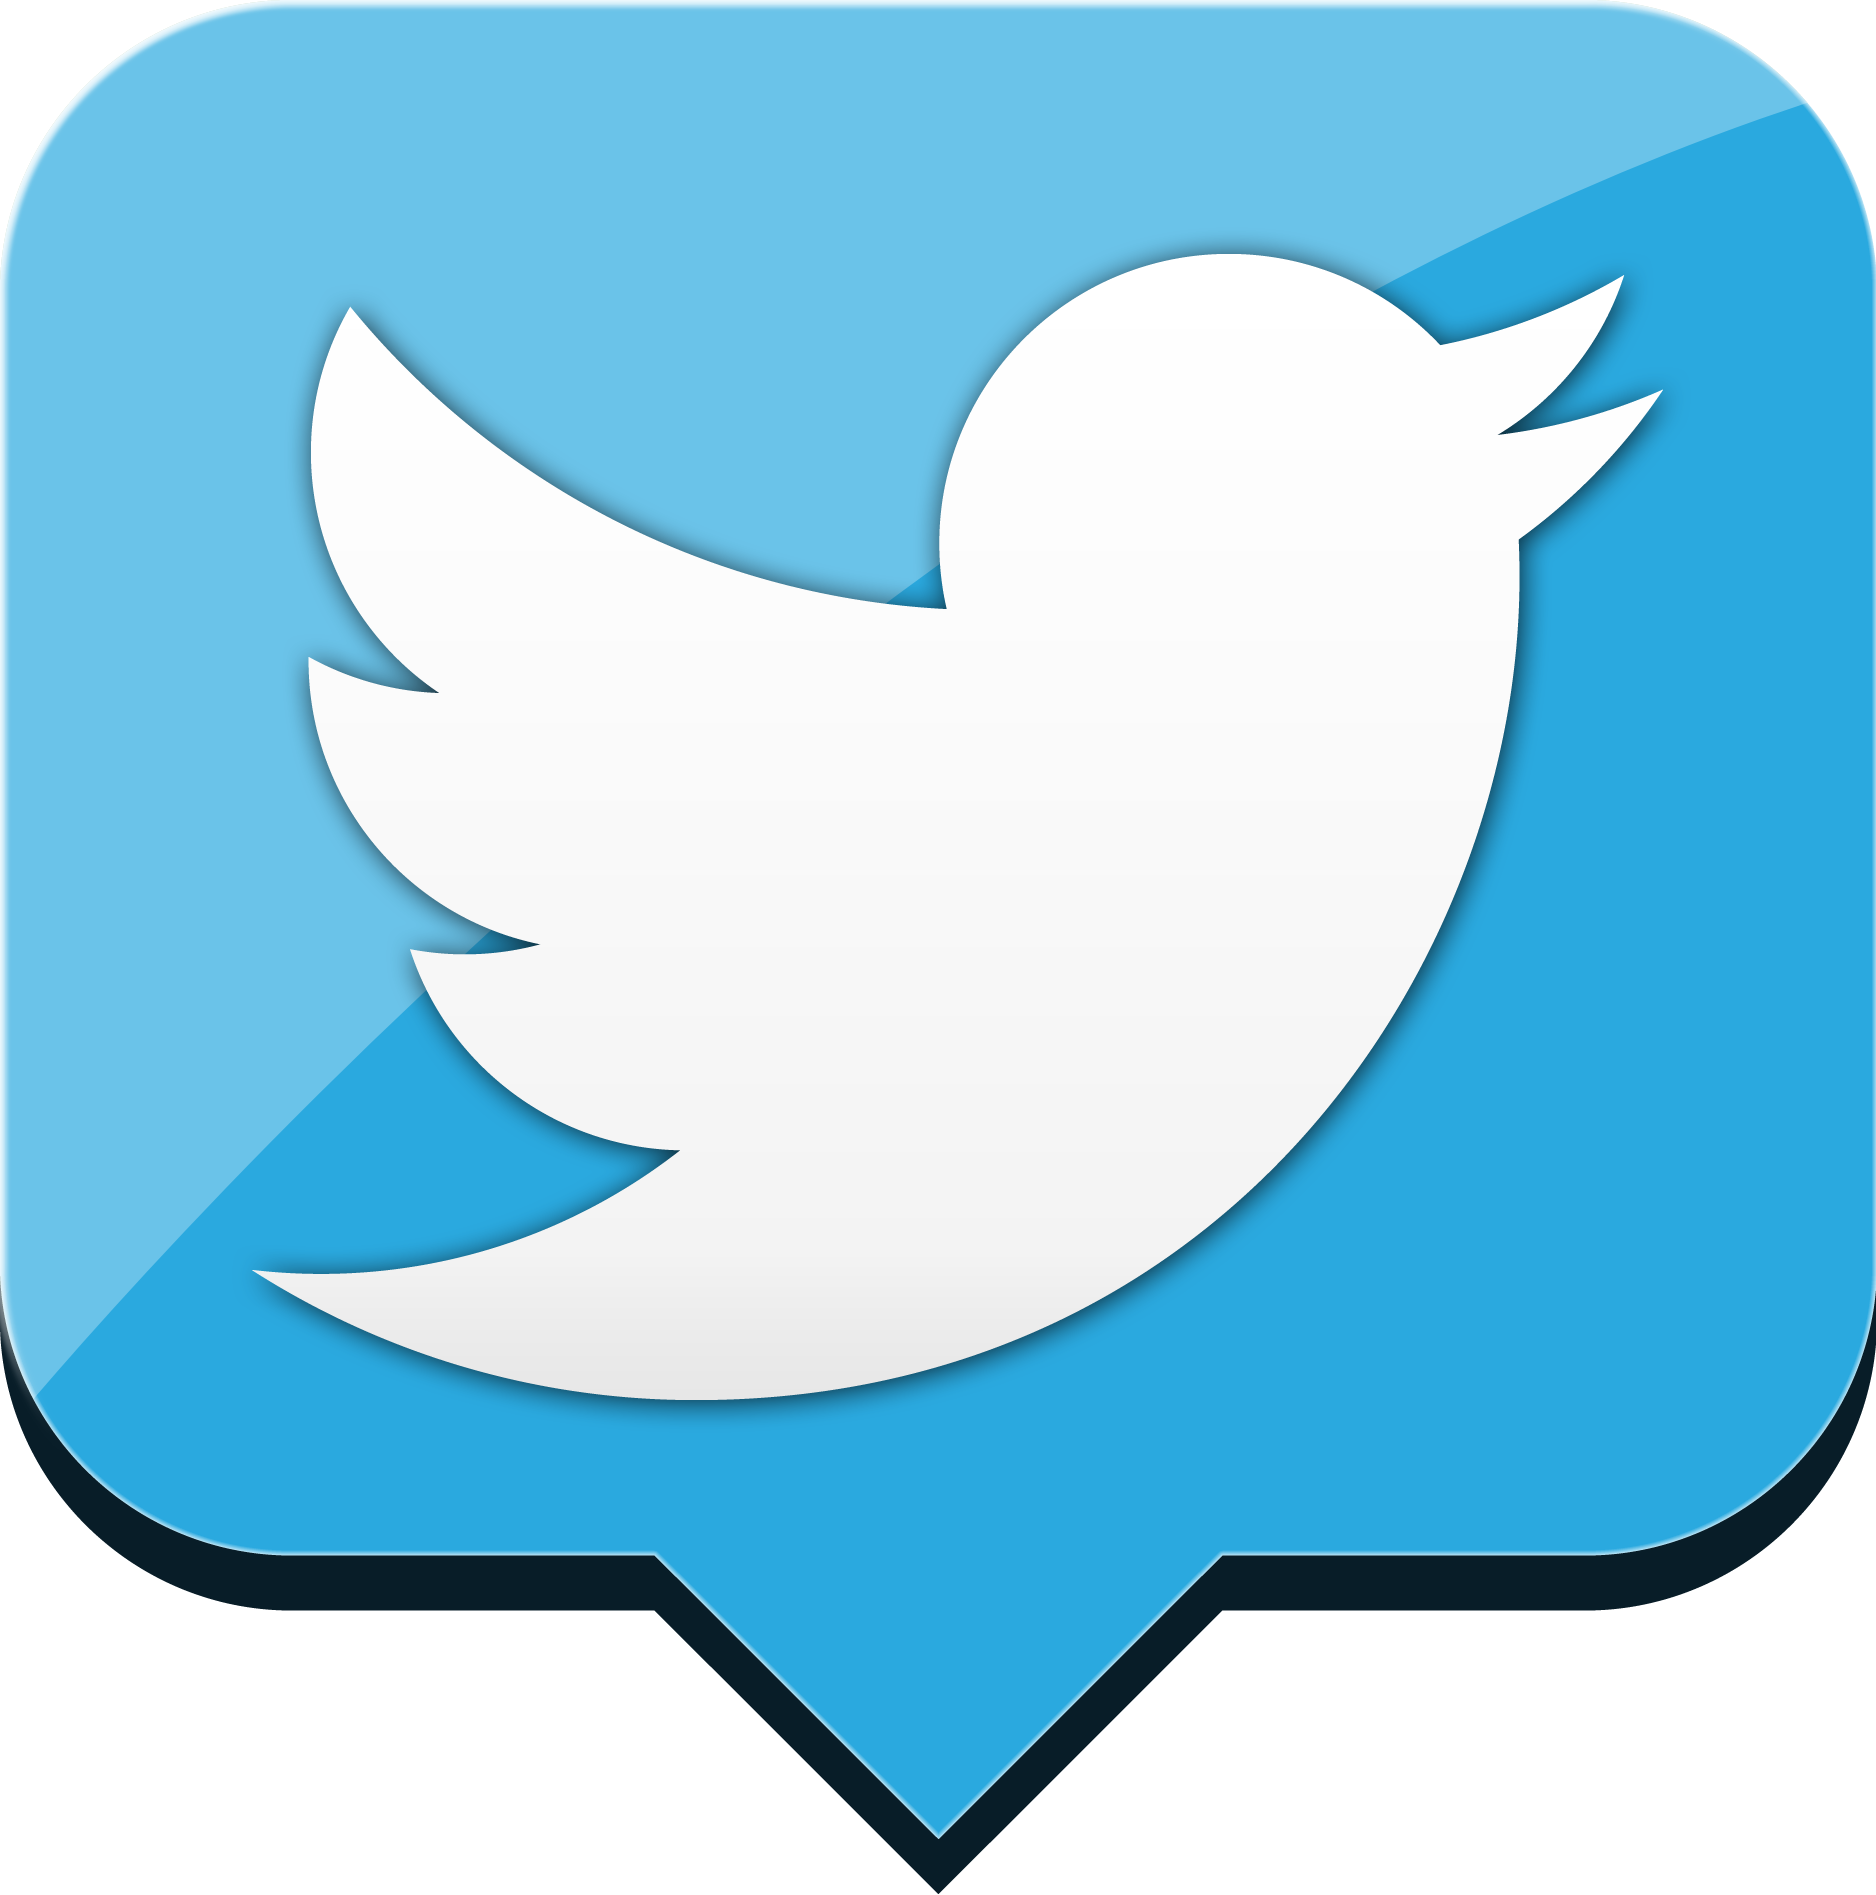 Like Media Button User Social Marketing Twitter PNG Image